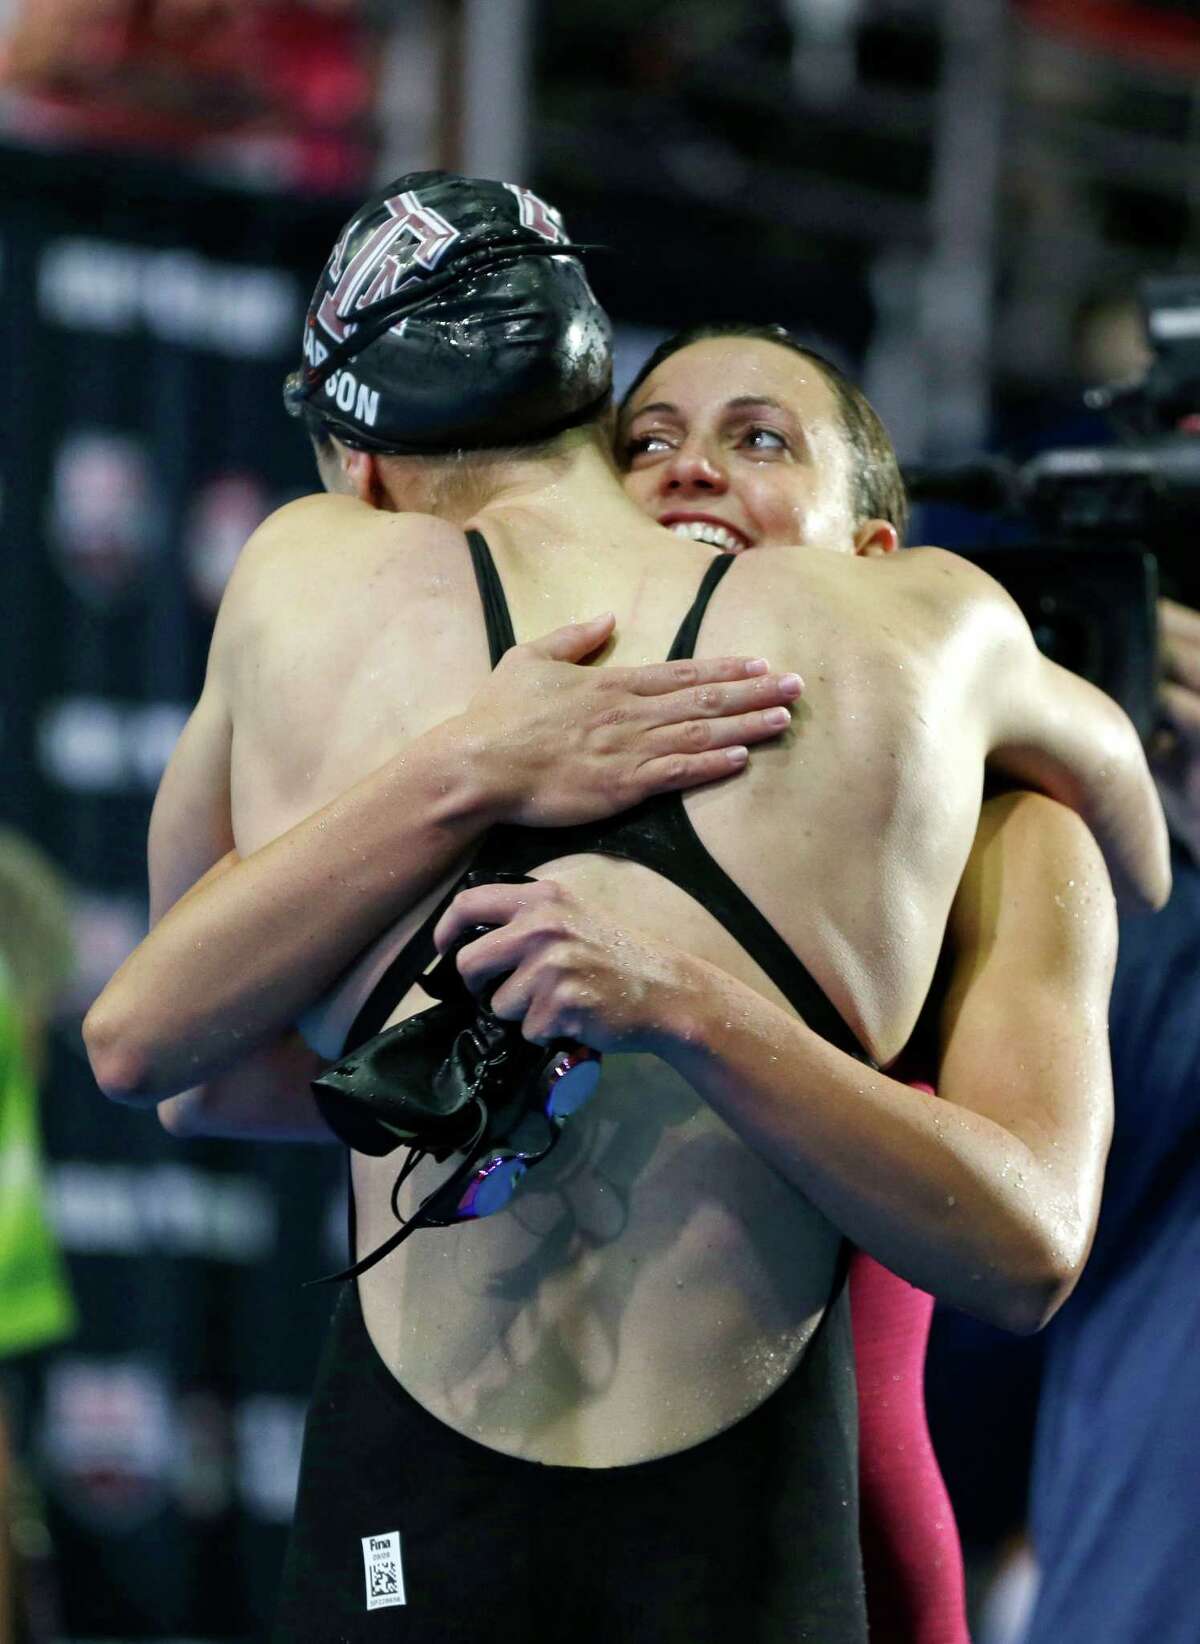 Breeja Larson, left, hugs Rebecca Soni after winning the women's 100-meter breaststroke final at the U.S. Olympic swimming trials on Wednesday, June 27, 2012, in Omaha, Neb. (AP Photo/Mark Humphrey)